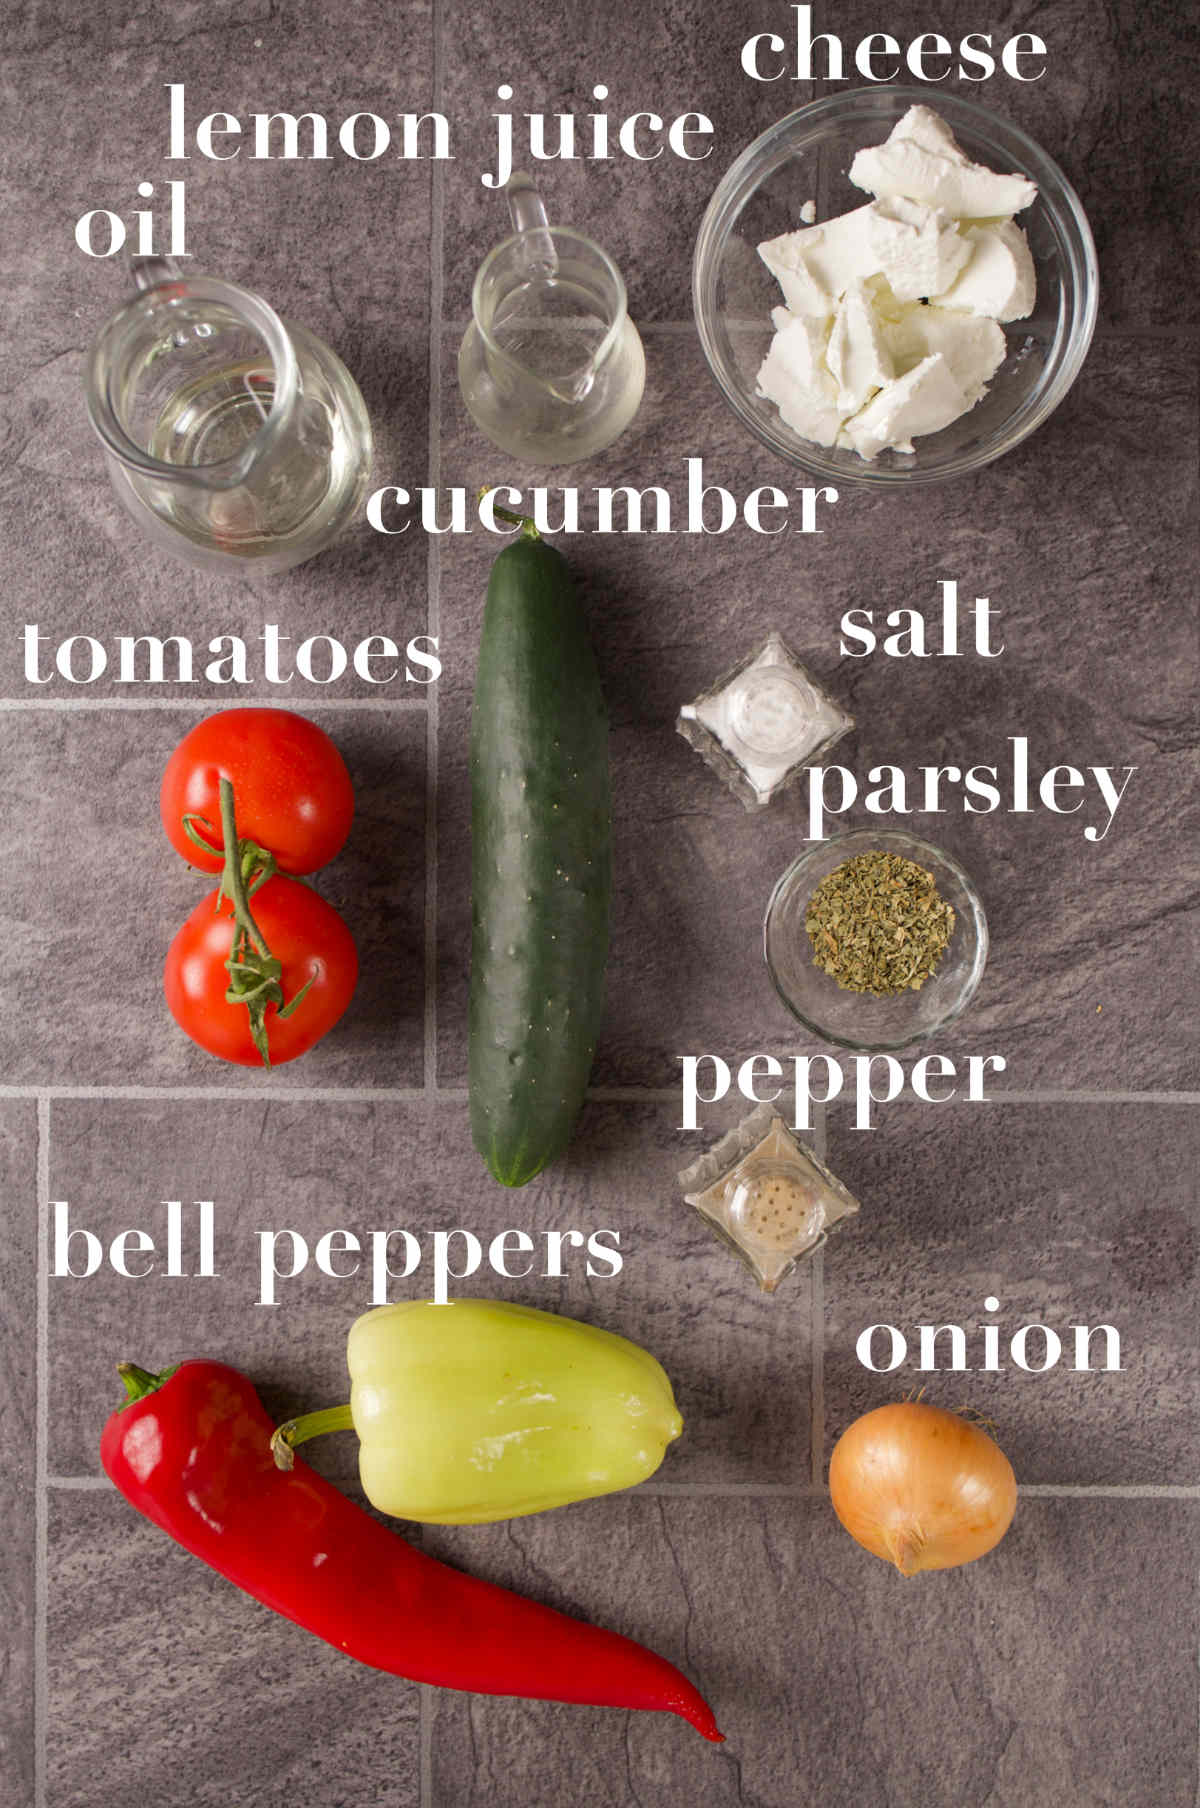 Oil, lemon juice, cheese, tomato, cucumber, peppers, onion and seasonings on a gray tabletop.